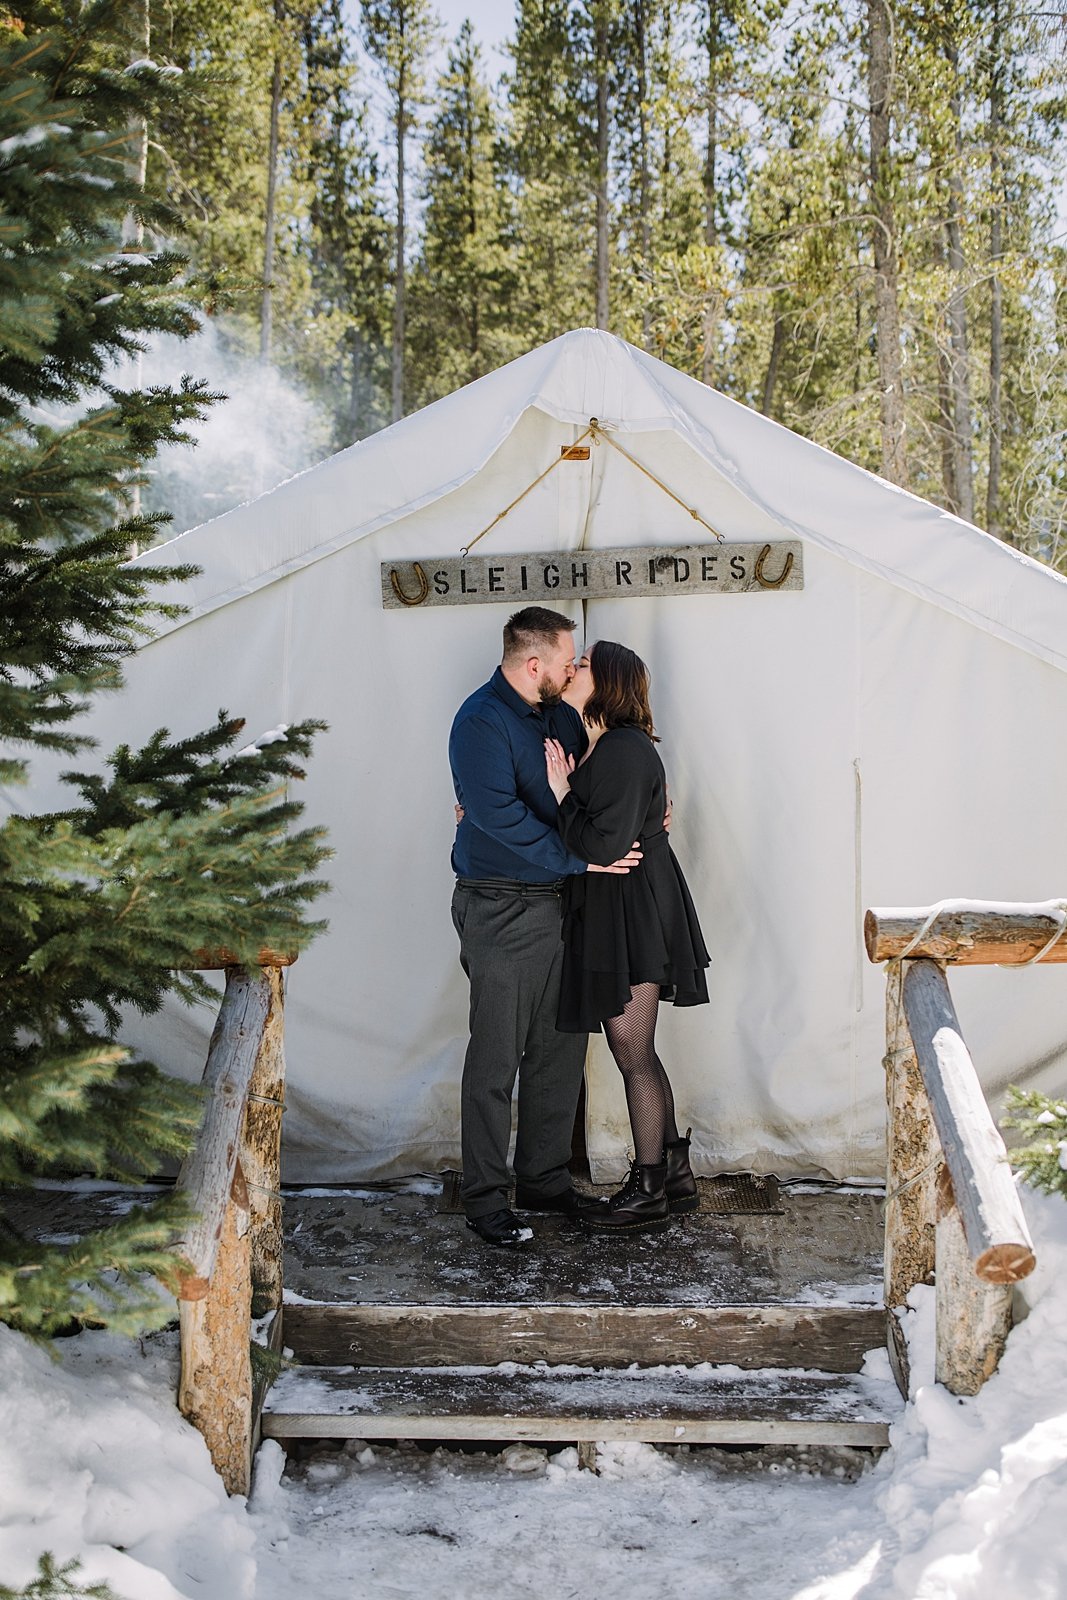 couple kissing in front of canvas tent, winter tent engagements, georgia pass winter proposal, georgia pass winter engagements, alpine engagements, alpine proposal, black engagement dress